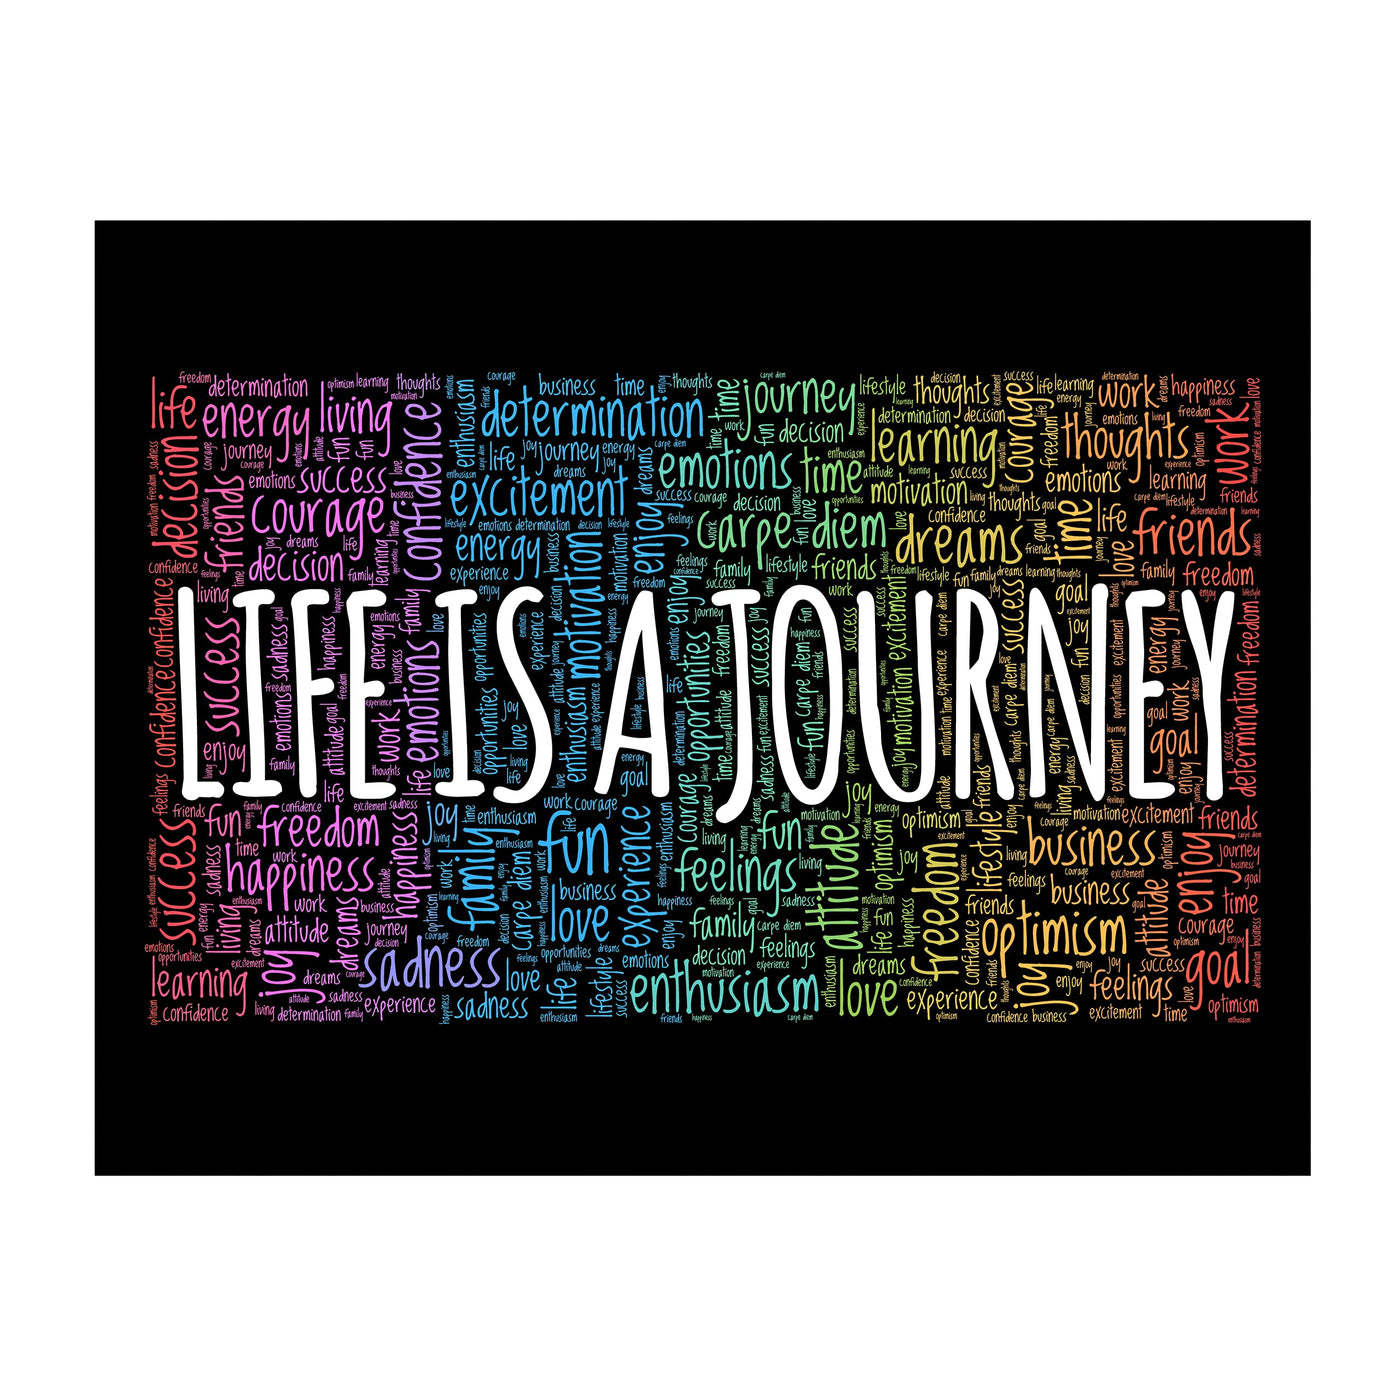 "Life Is A Journey" Inspirational Quotes Wall Decor -14 x 11" Motivational Word Art Print -Ready to Frame. Home-Office-Classroom-Work Decor. Encouraging Words for Motivation & Inspiration!